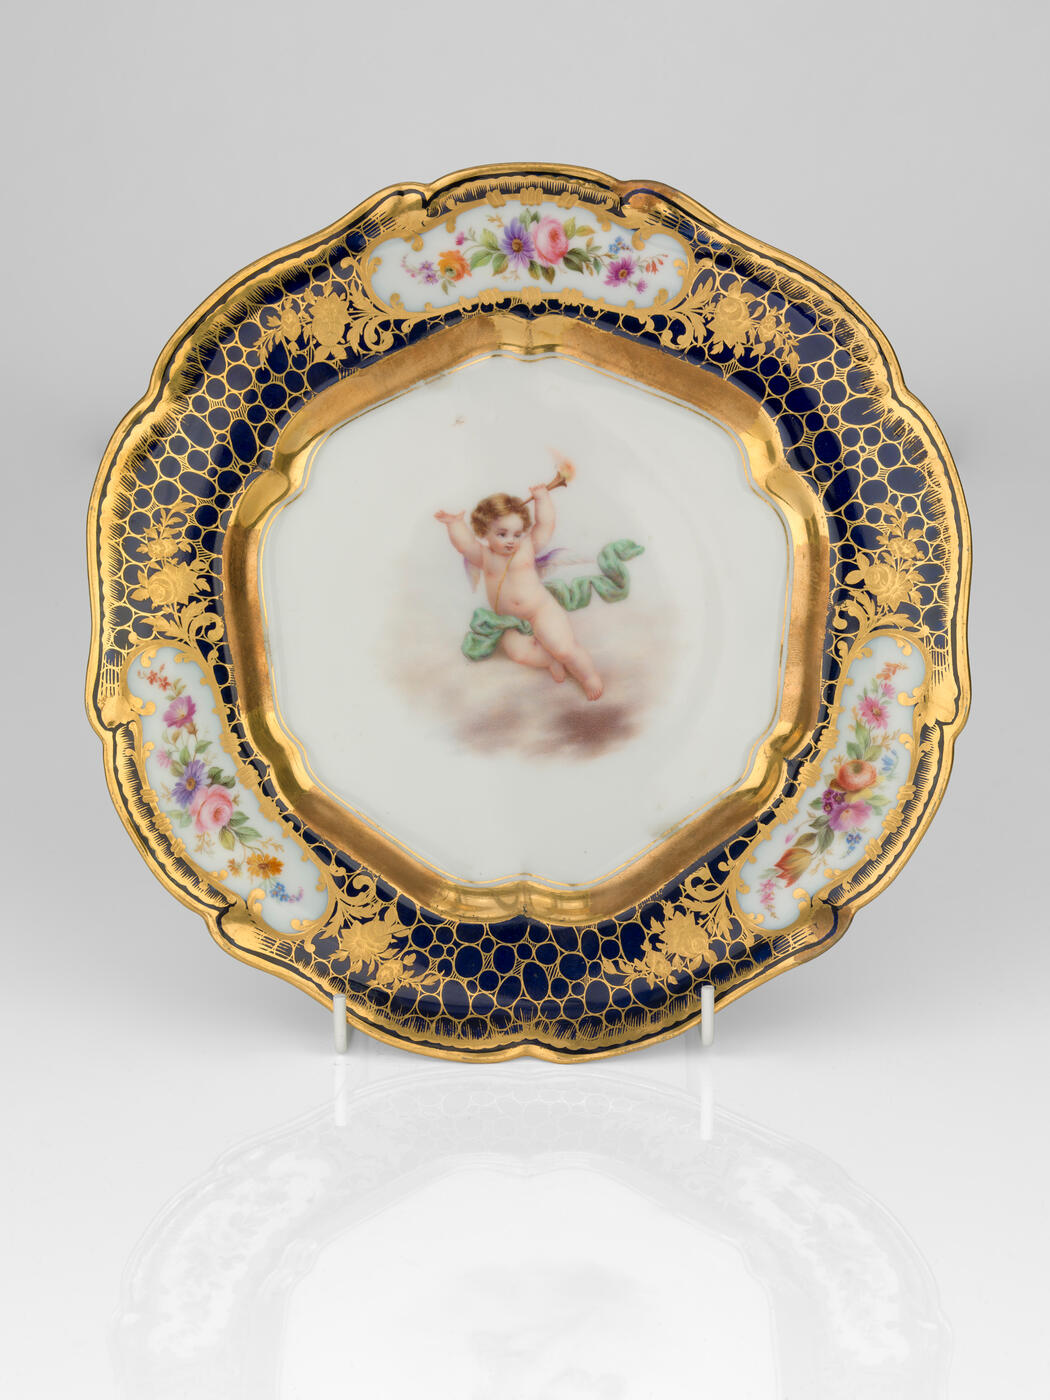 A Porcelain Dessert Plate with Angel Putti